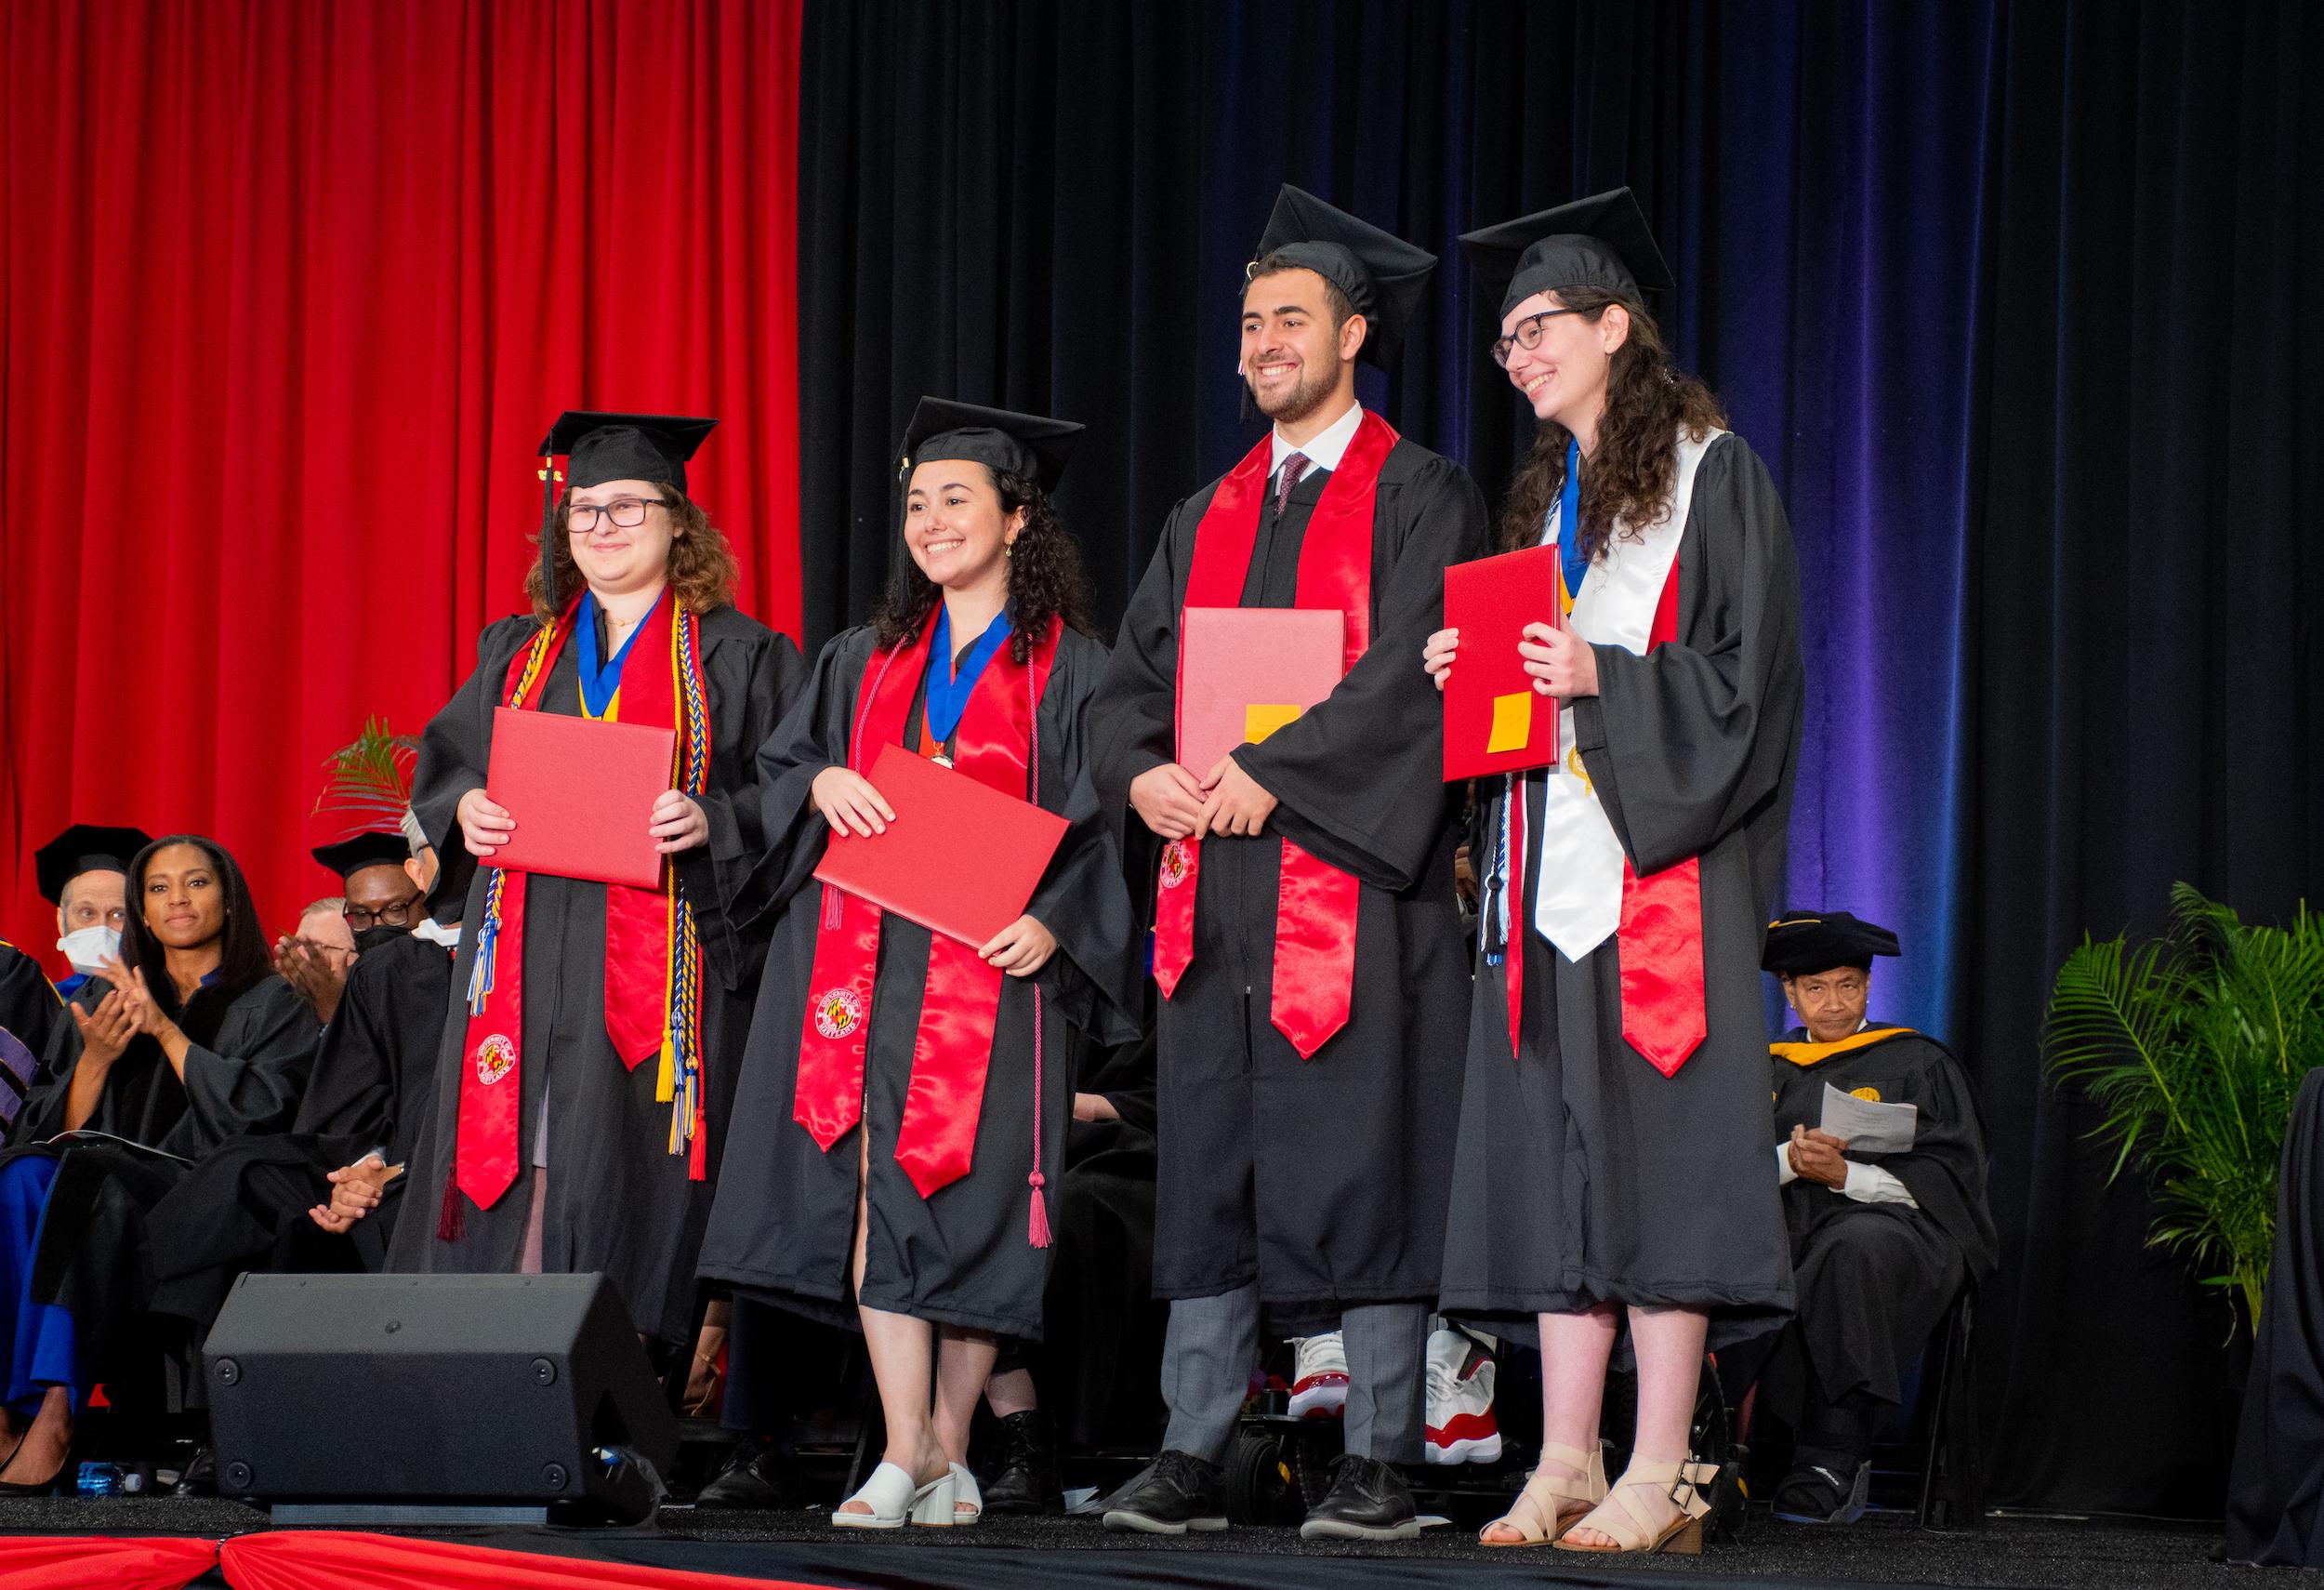 Merrill students given award at commencement